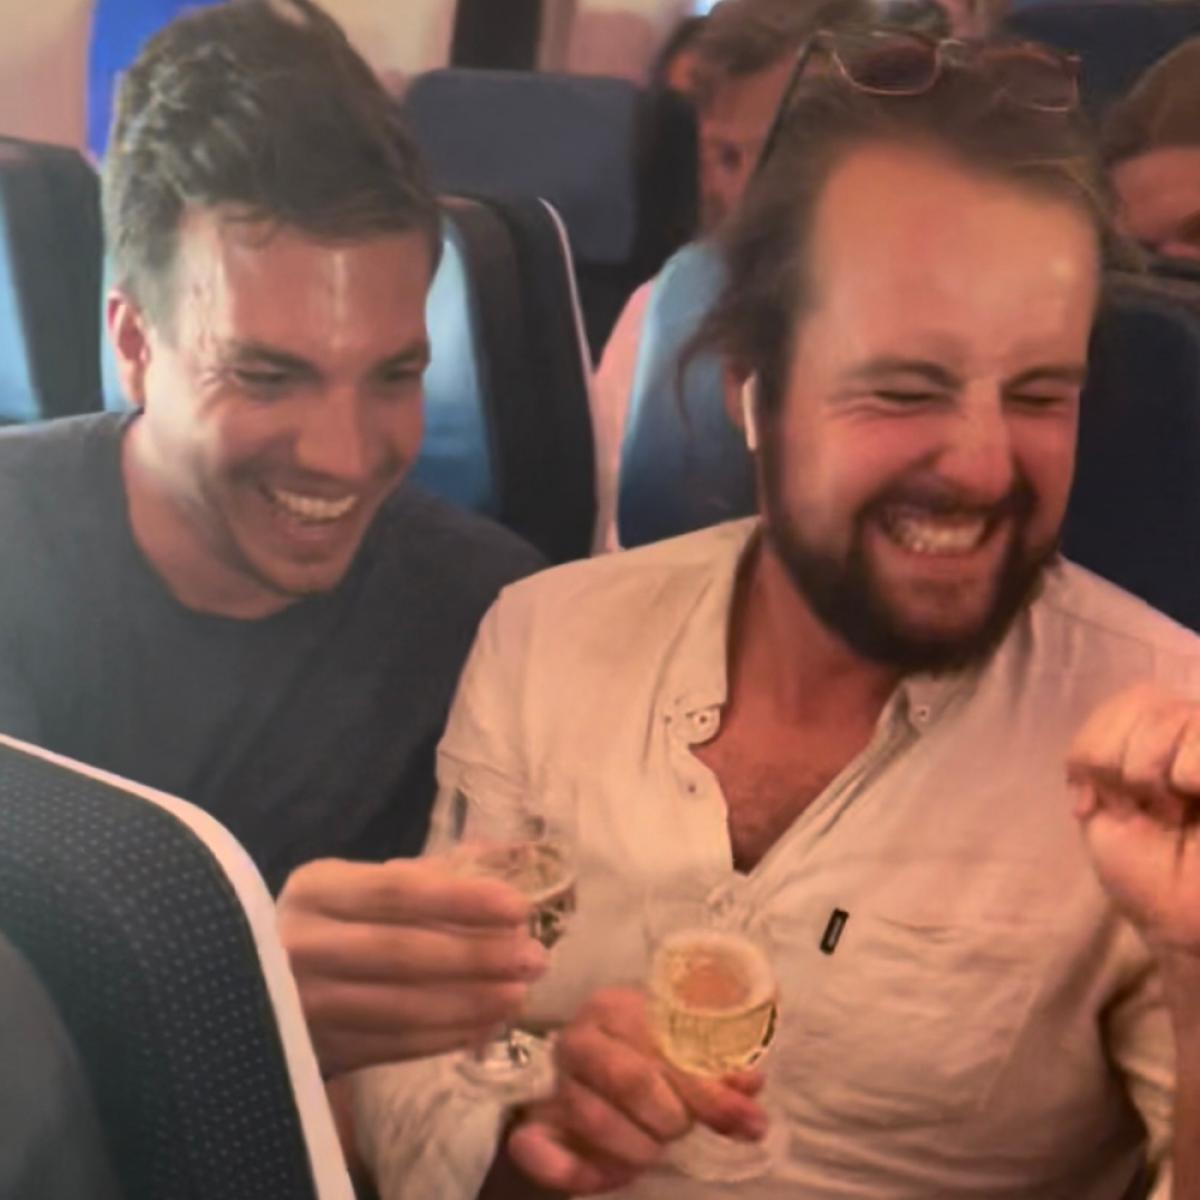 Champagne on the plane